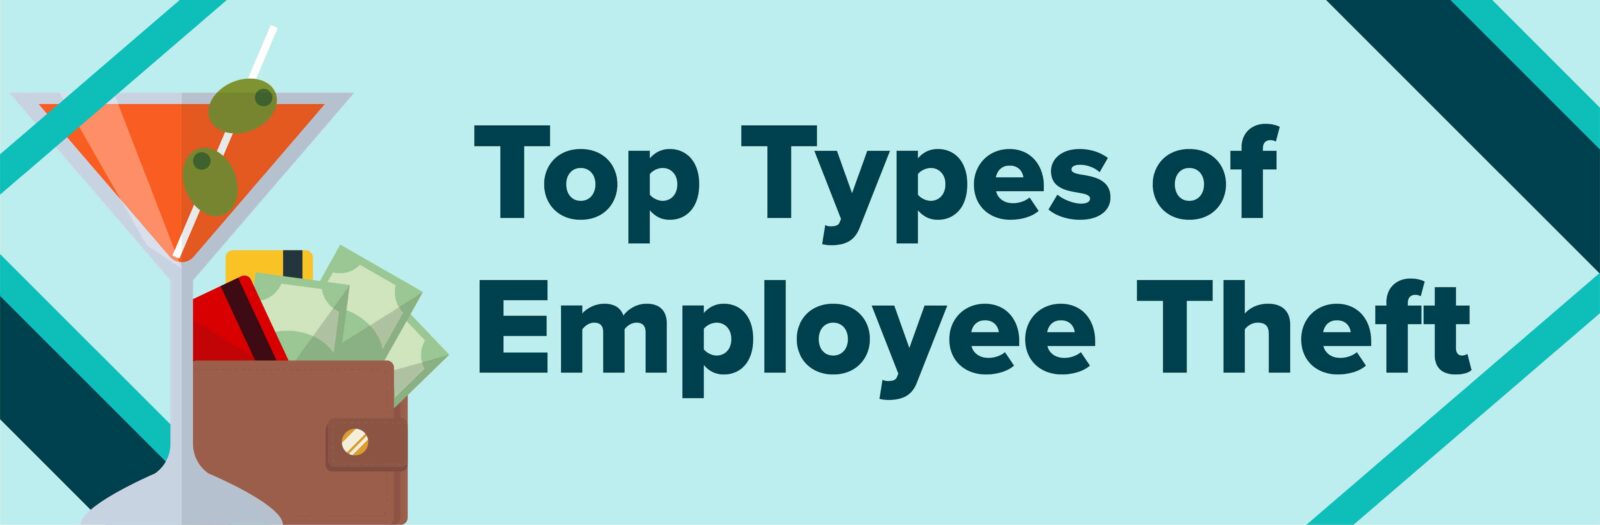 Top Types Of Employee Theft Infographic.